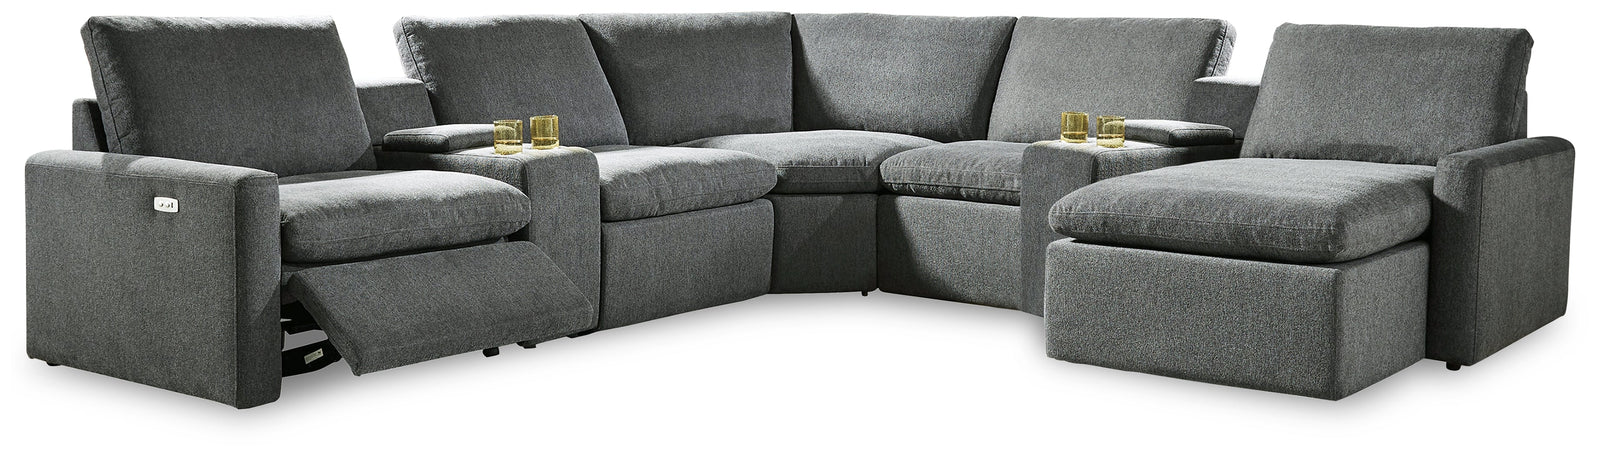 Hartsdale Granite 7-Piece Power Reclining Sectional